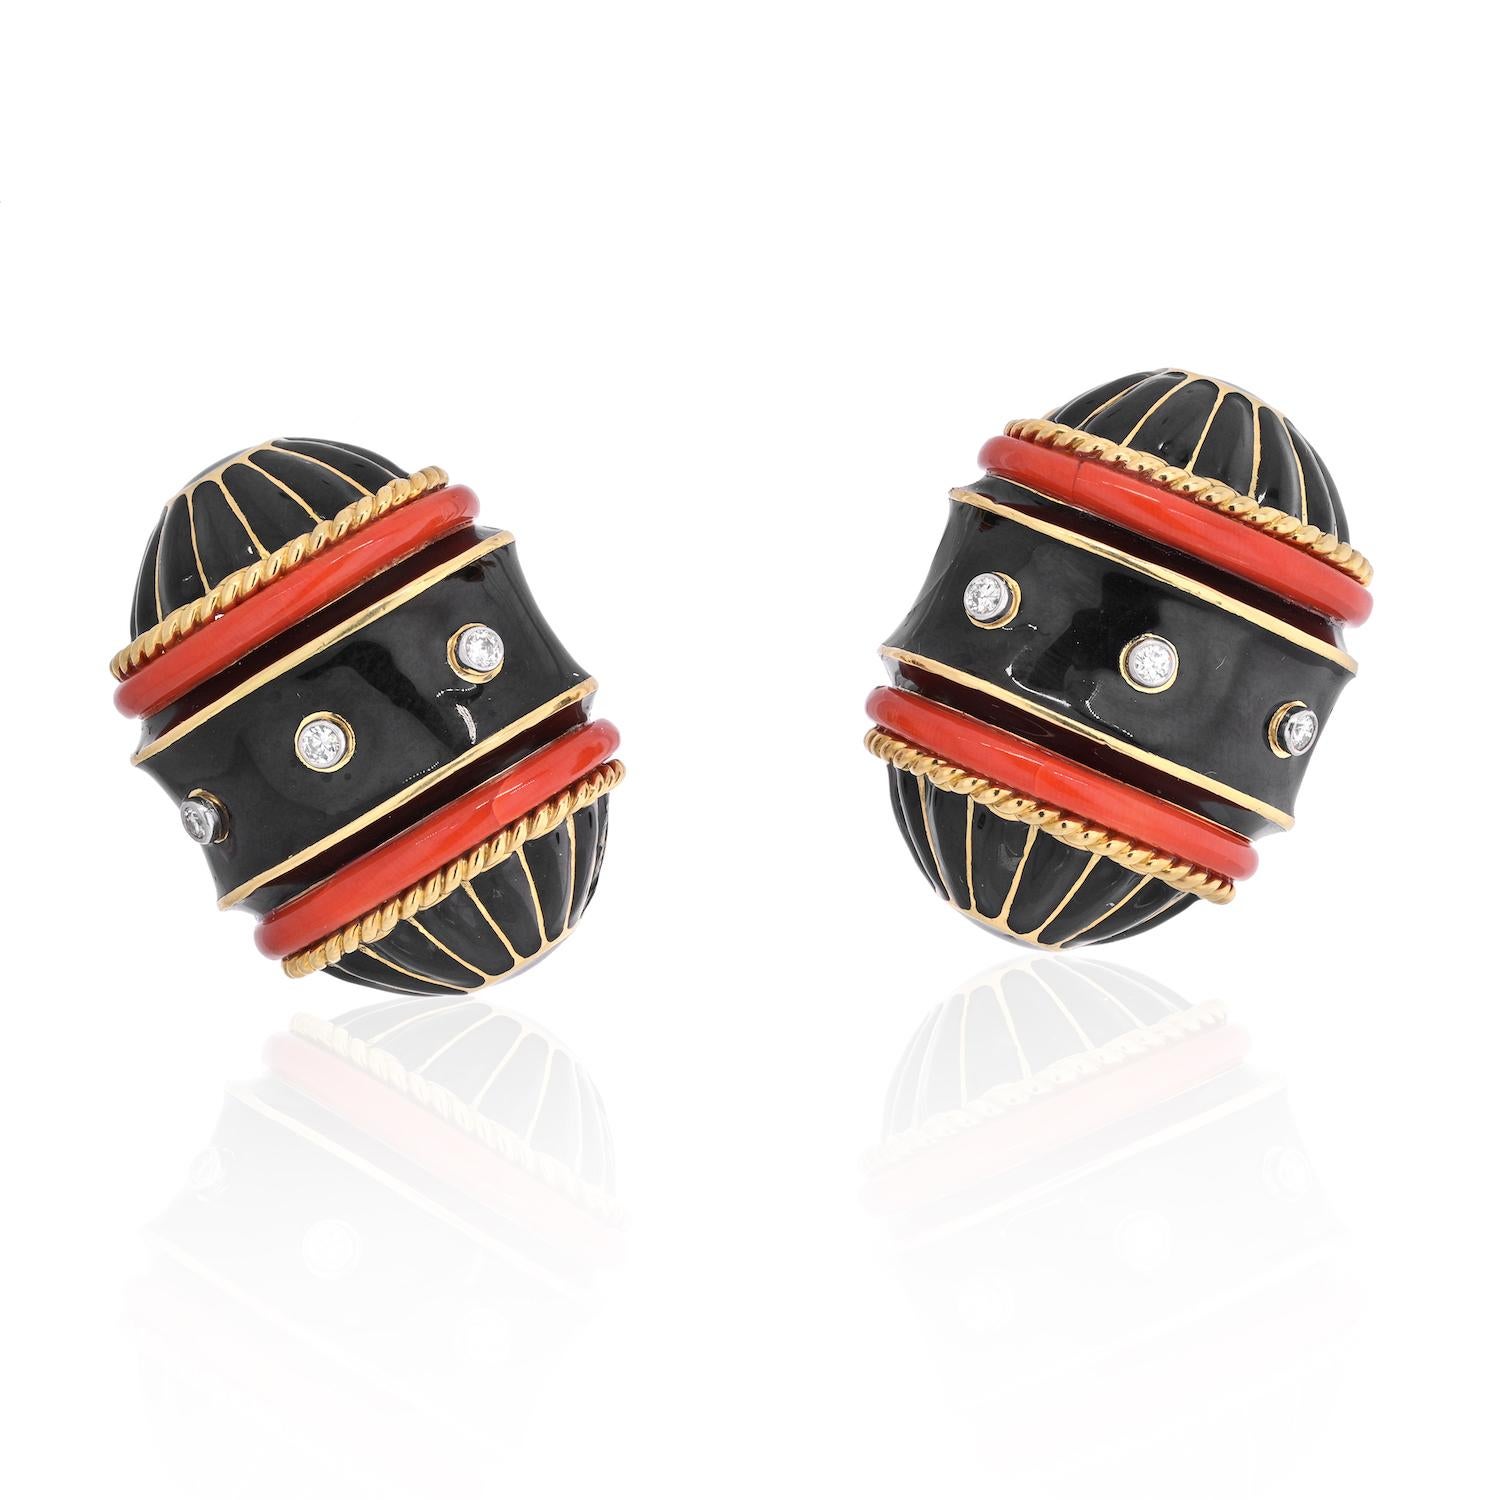 David Webb Stud Collection.
These are barrel-like shaped earrings mounted with carved coral, collet-set diamonds, black enamel, 18K gold, and platinum.
0.75 inches long. 
Clip-on closure for non pierced ears.